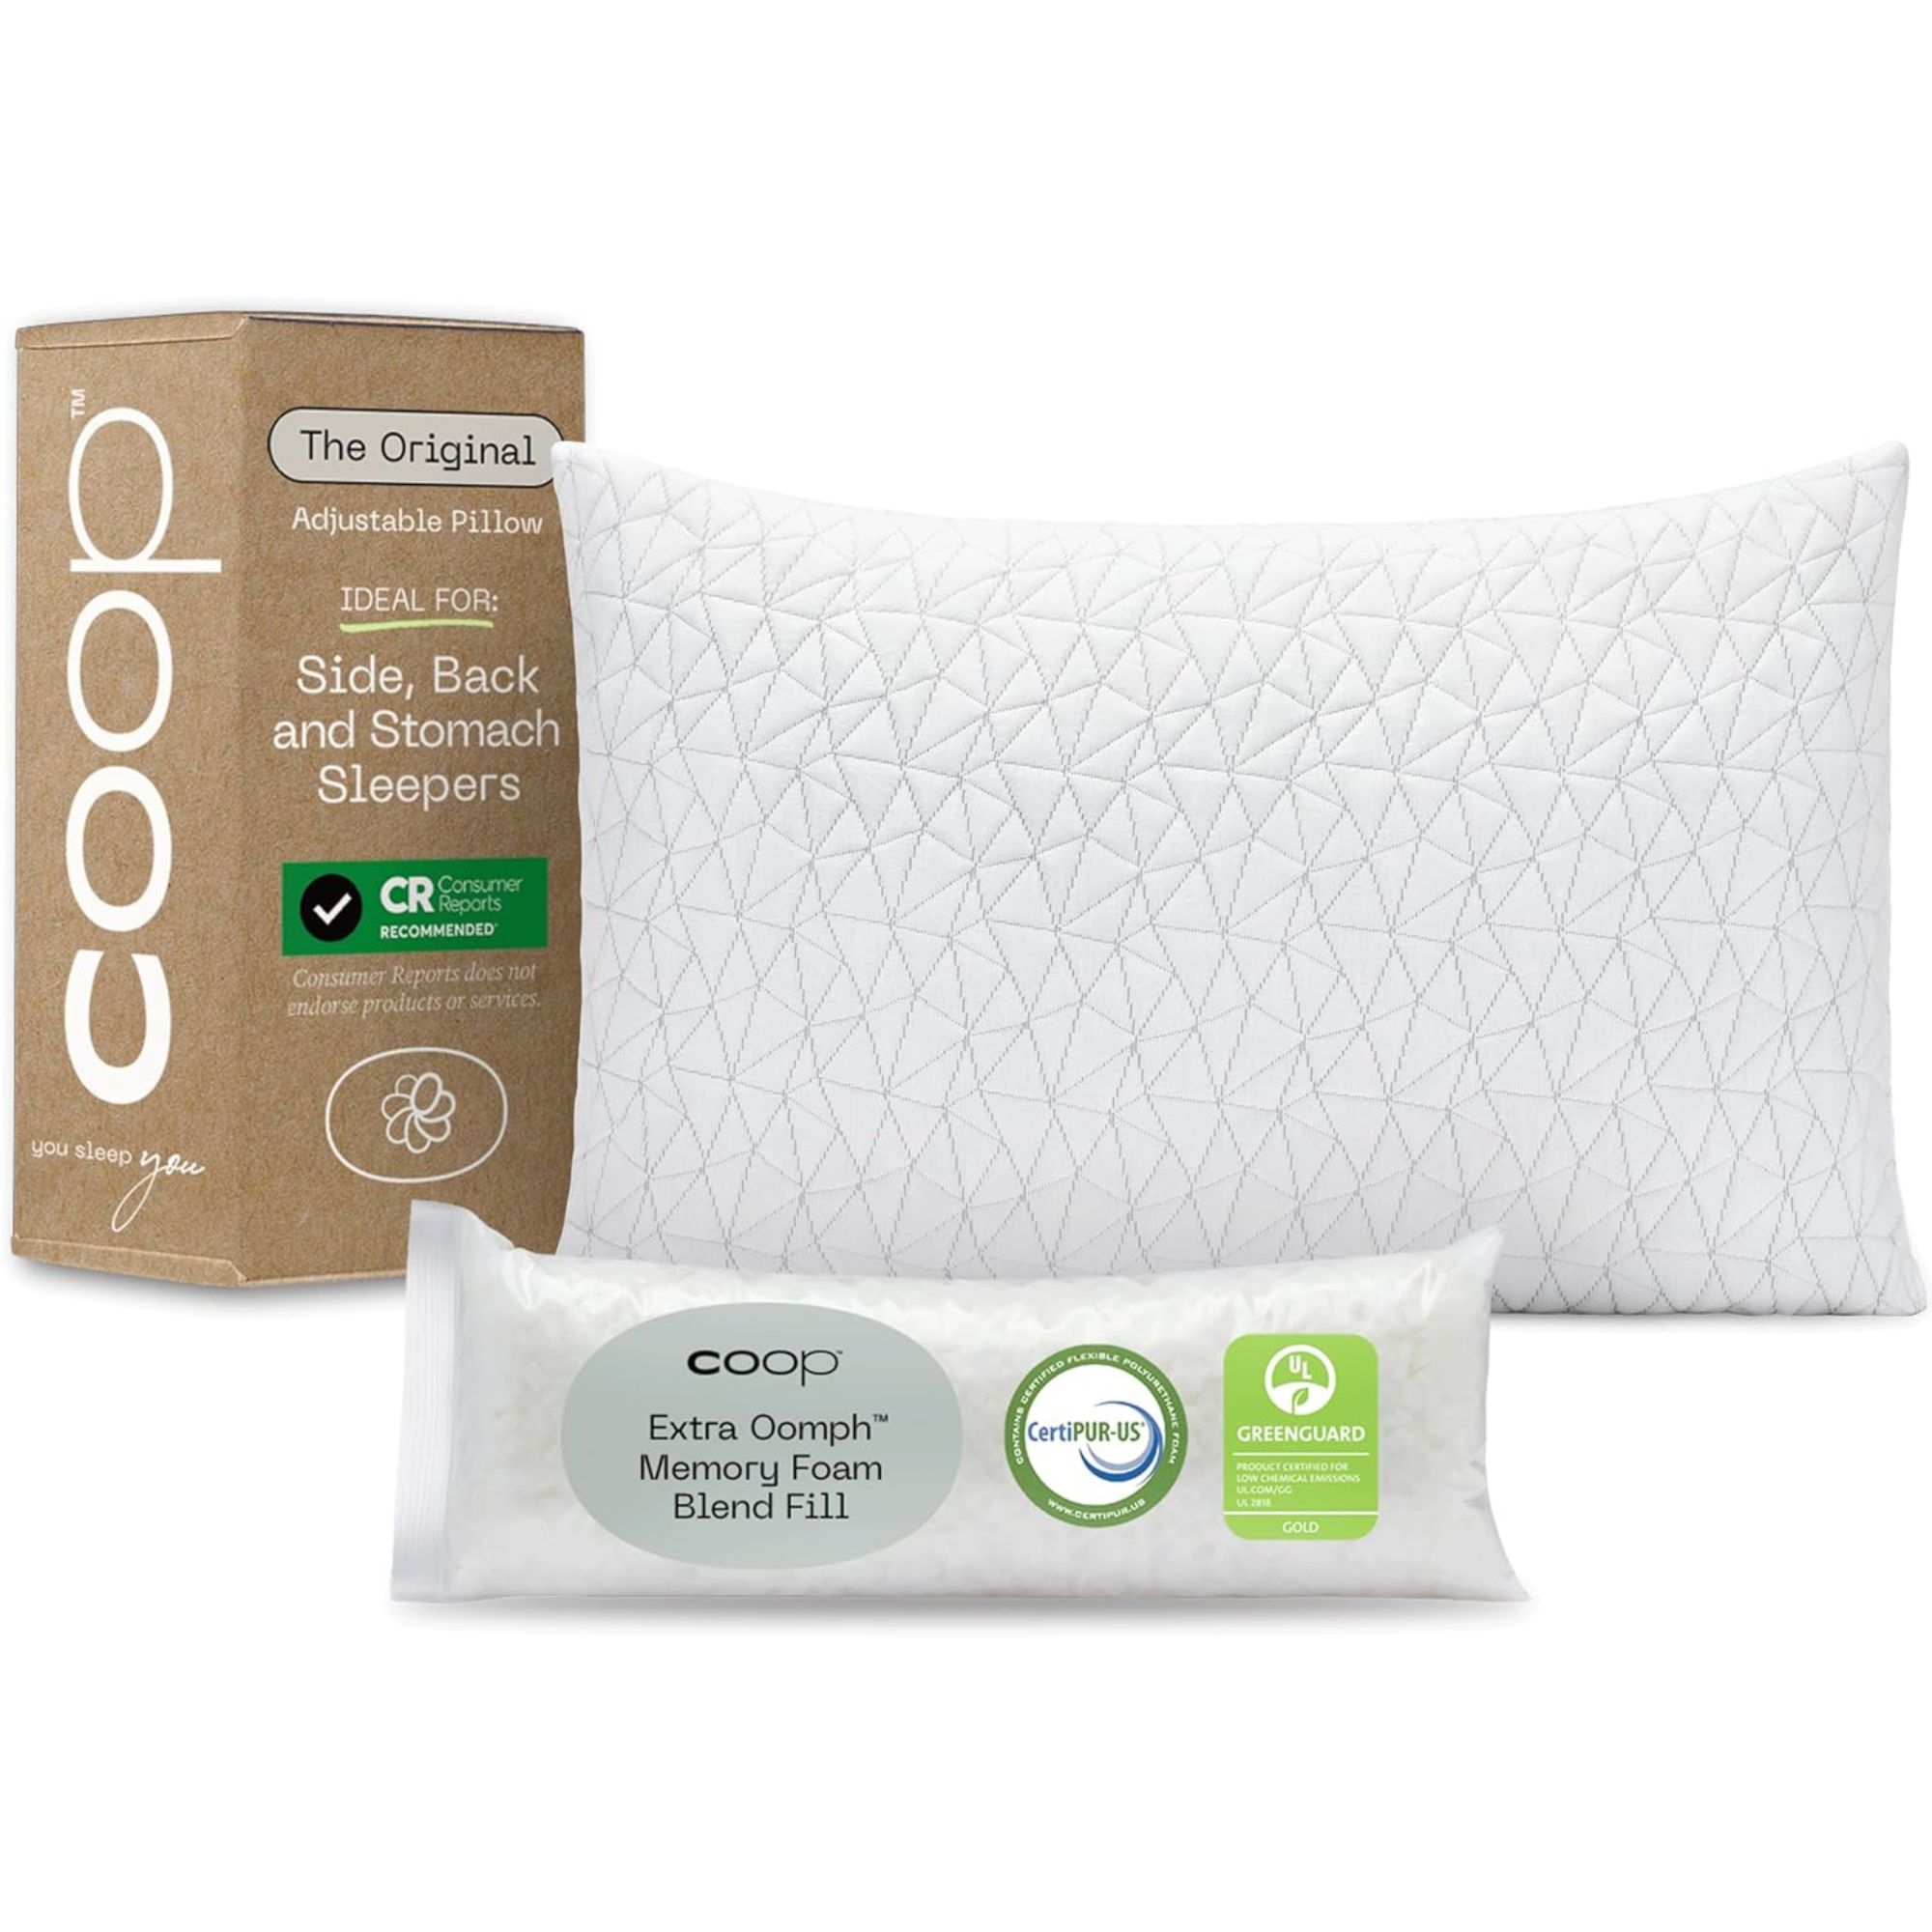 Coop Home Goods Original Adjustable Pillow against a white background.